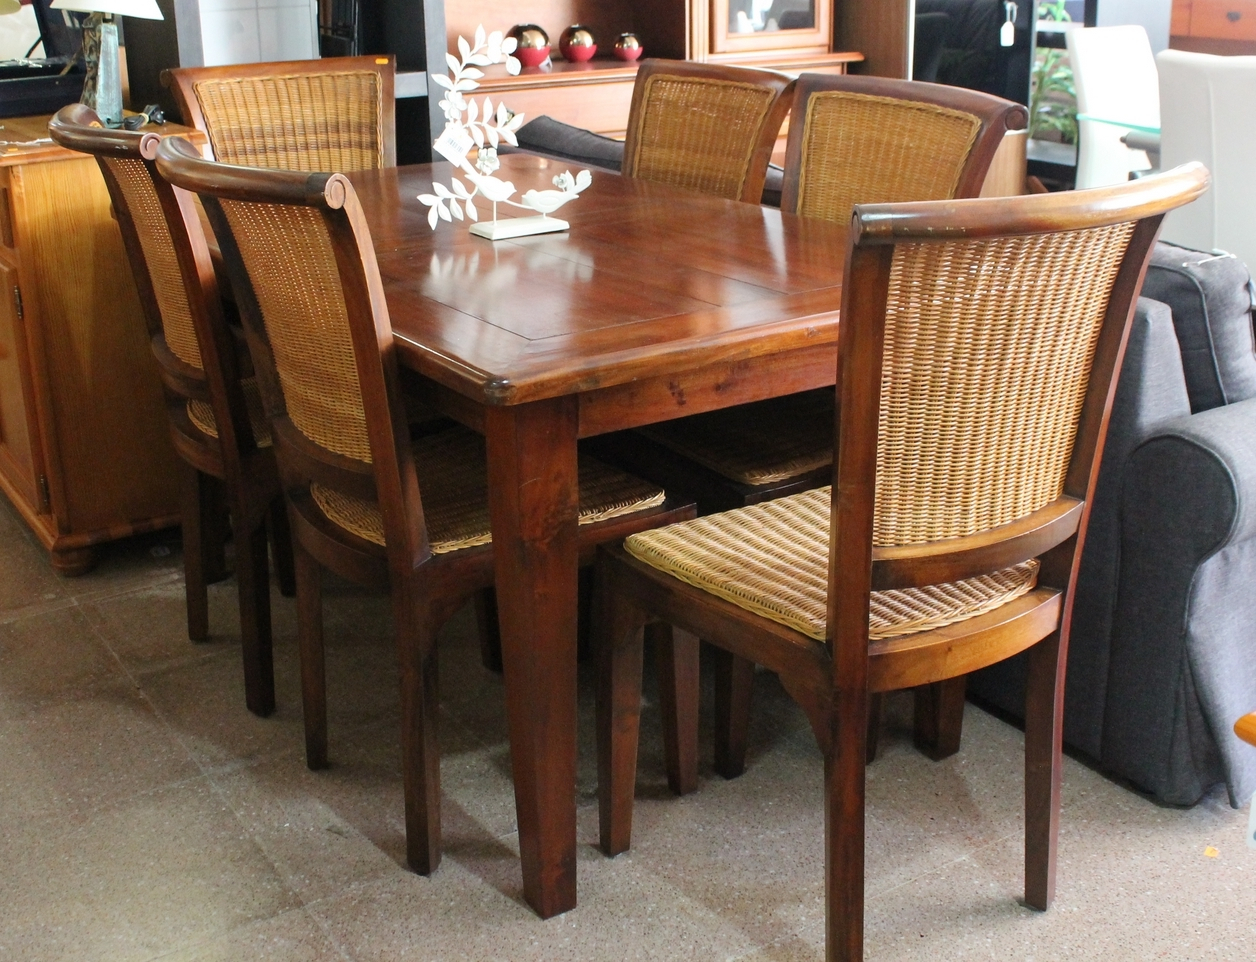 Second Hand Glass Dining Room Table And Chairs